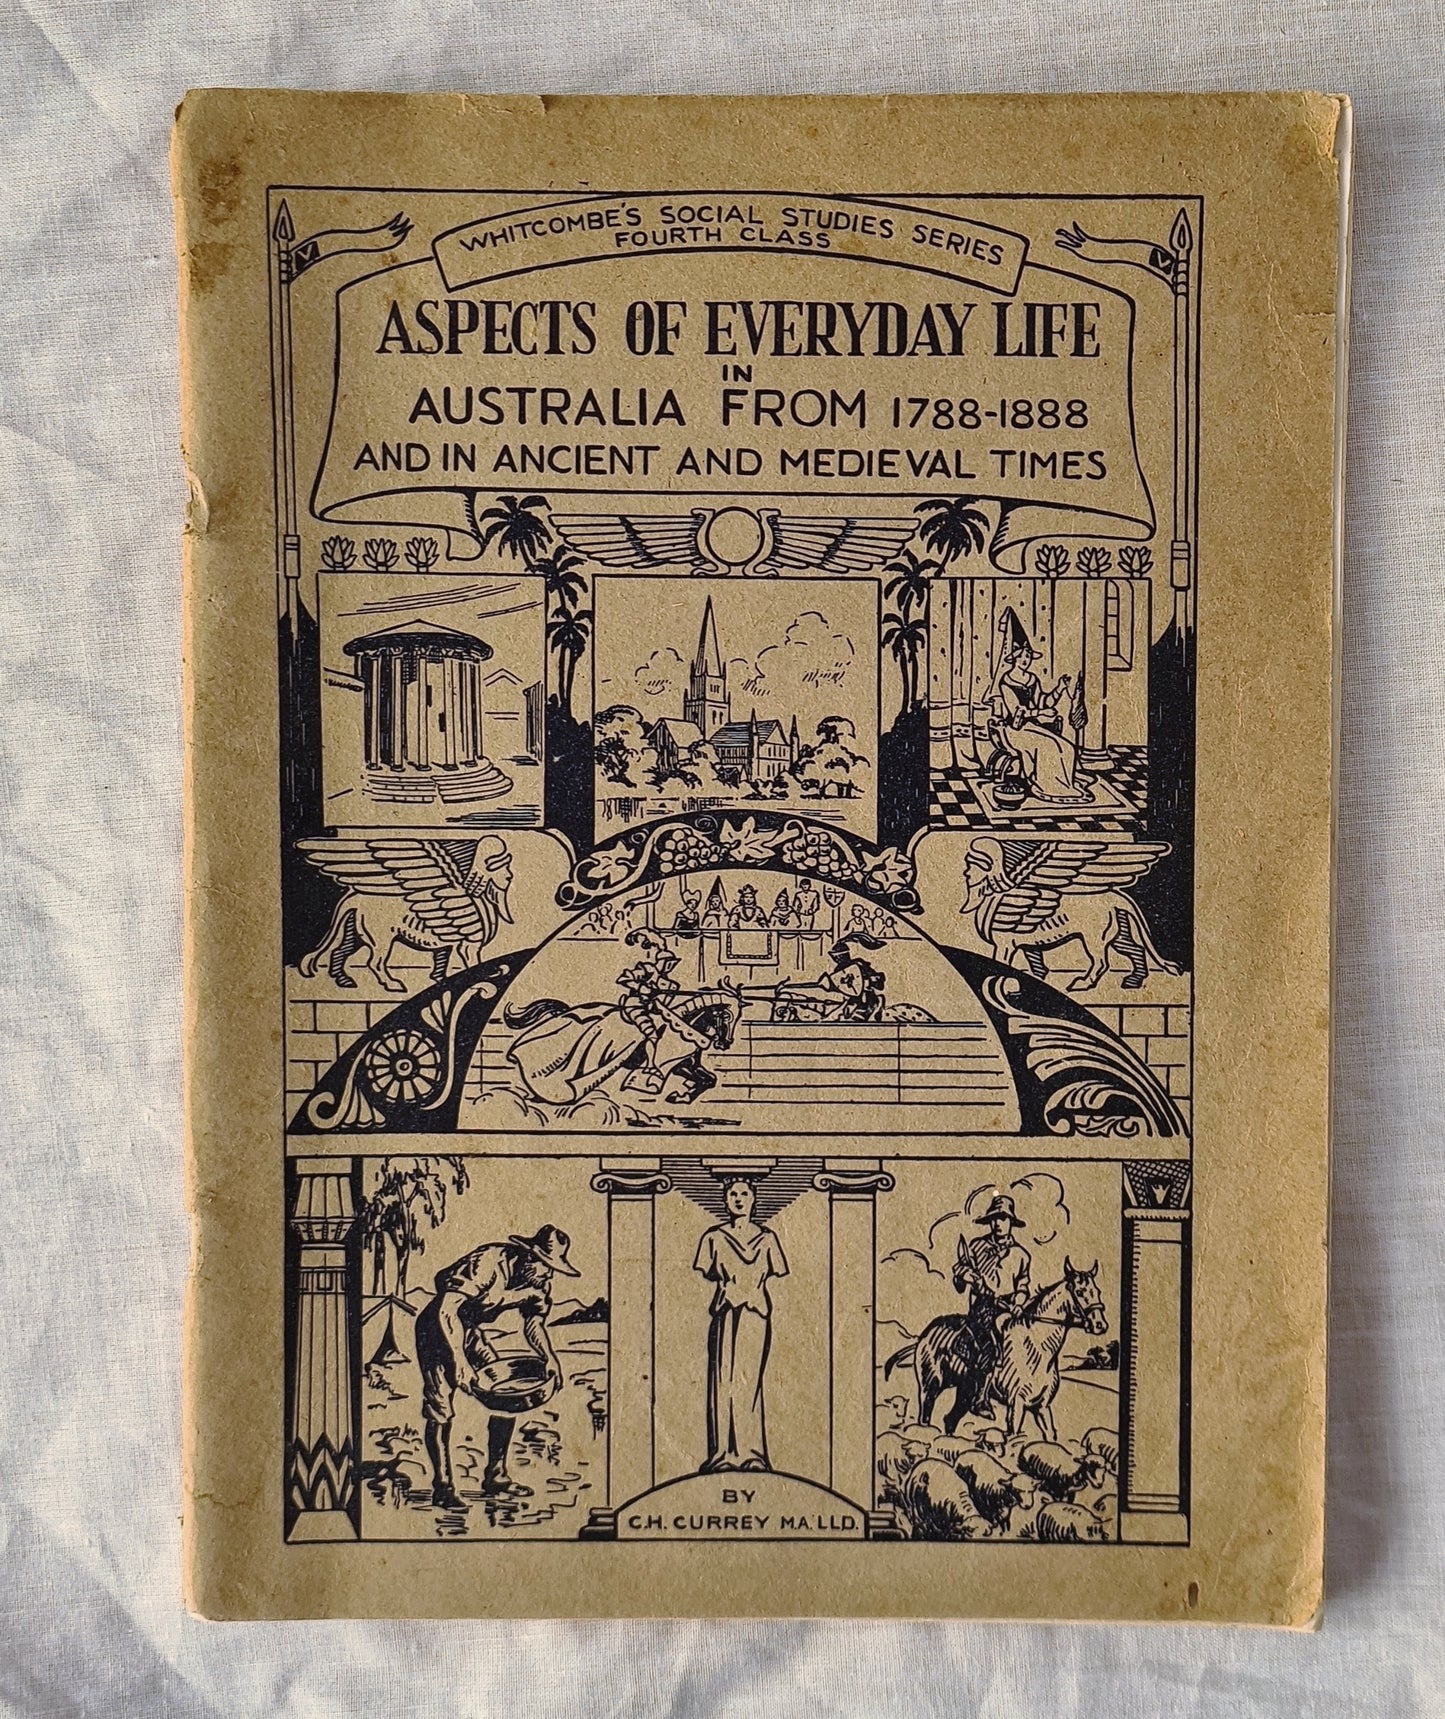 Aspects of Everyday Life in Australia  1788-1888  And In Ancient and Mediaeval Times  by C. H. Currey  (Whitcombe’s Social Studies Series)